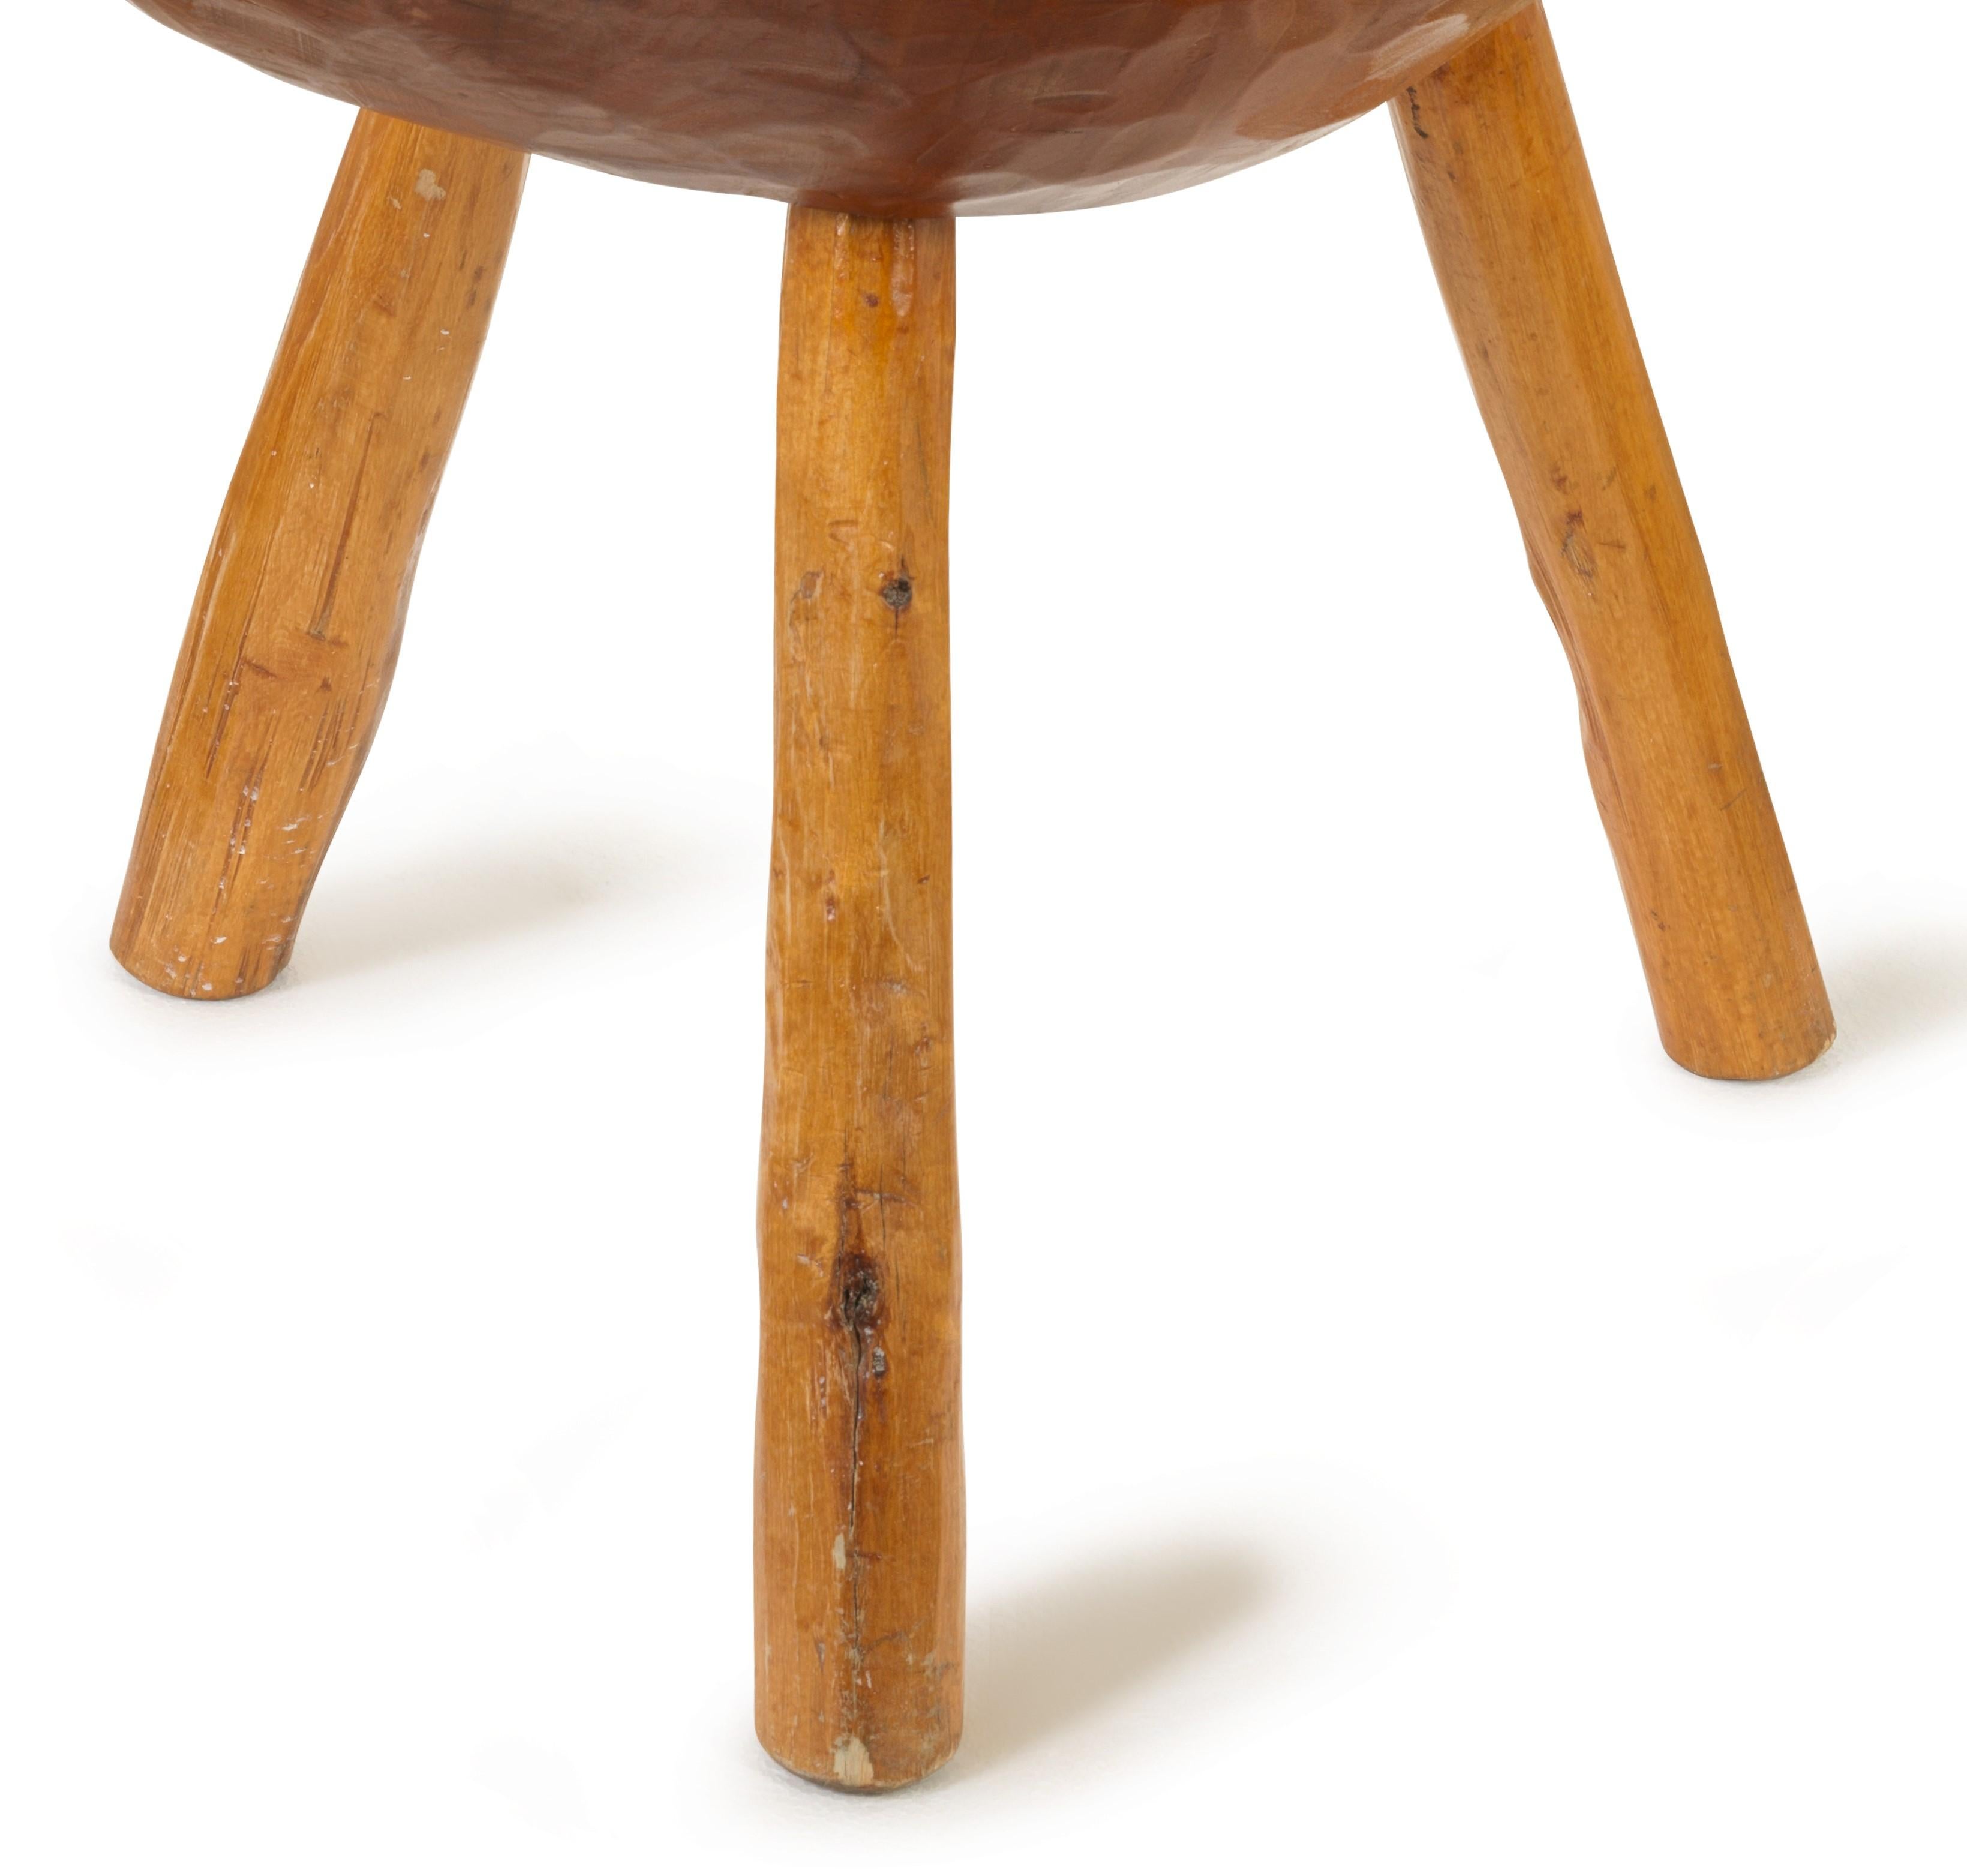 European Mid-Century Wooden Stools with Hand-Carved Scoop Seats, Europe ca 1950s In Good Condition For Sale In Budapest, HU